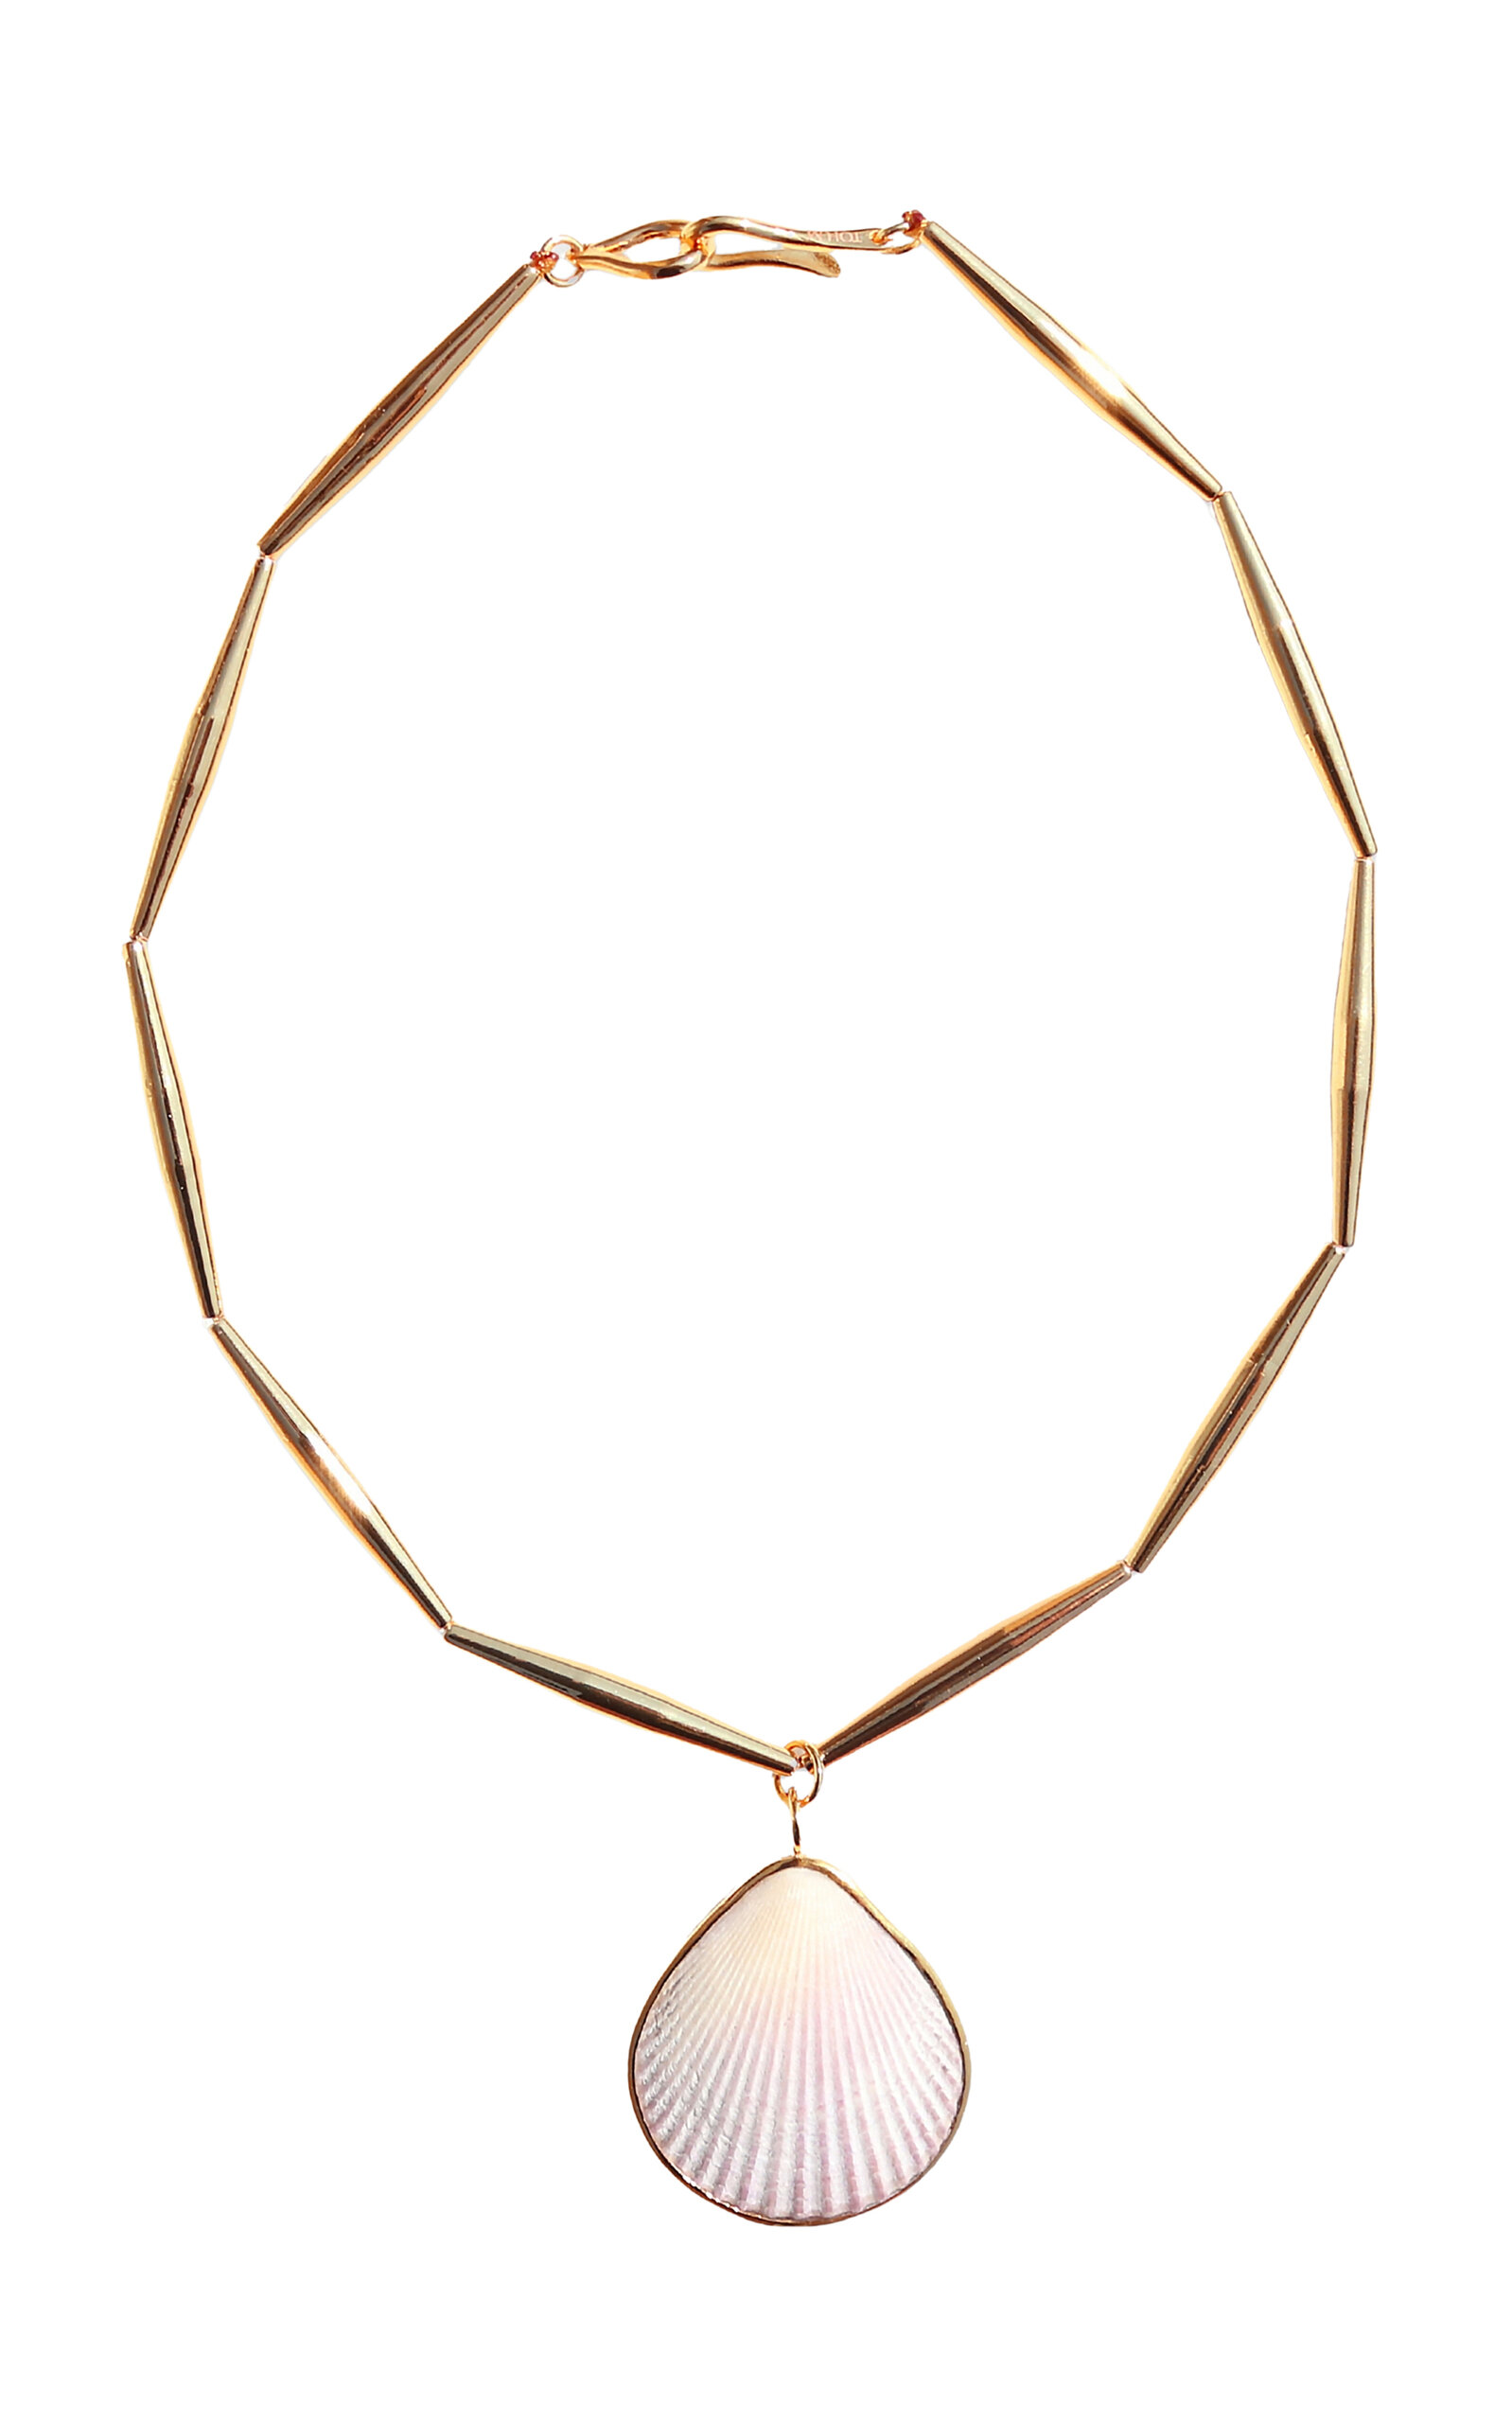 Helia 24k Gold-Plated Shell Pendant Necklace